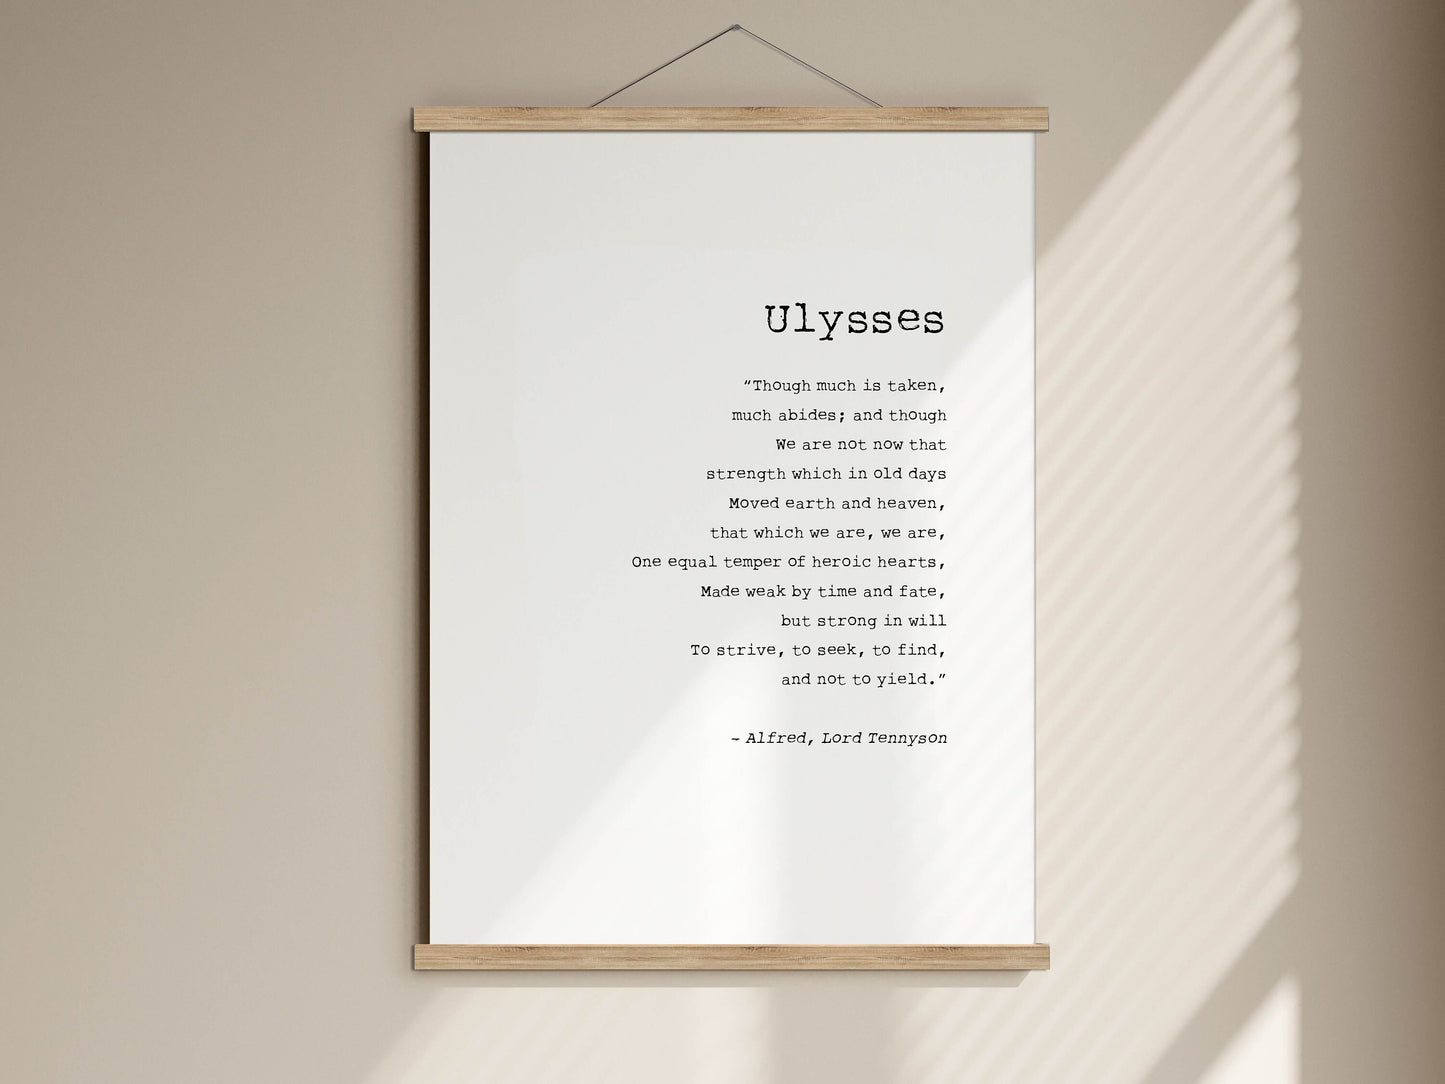 Ulysses book quote by Alfred Lord tennyson Print, Framed oak hanger poster, Poem by Alfred Lord Tennyson